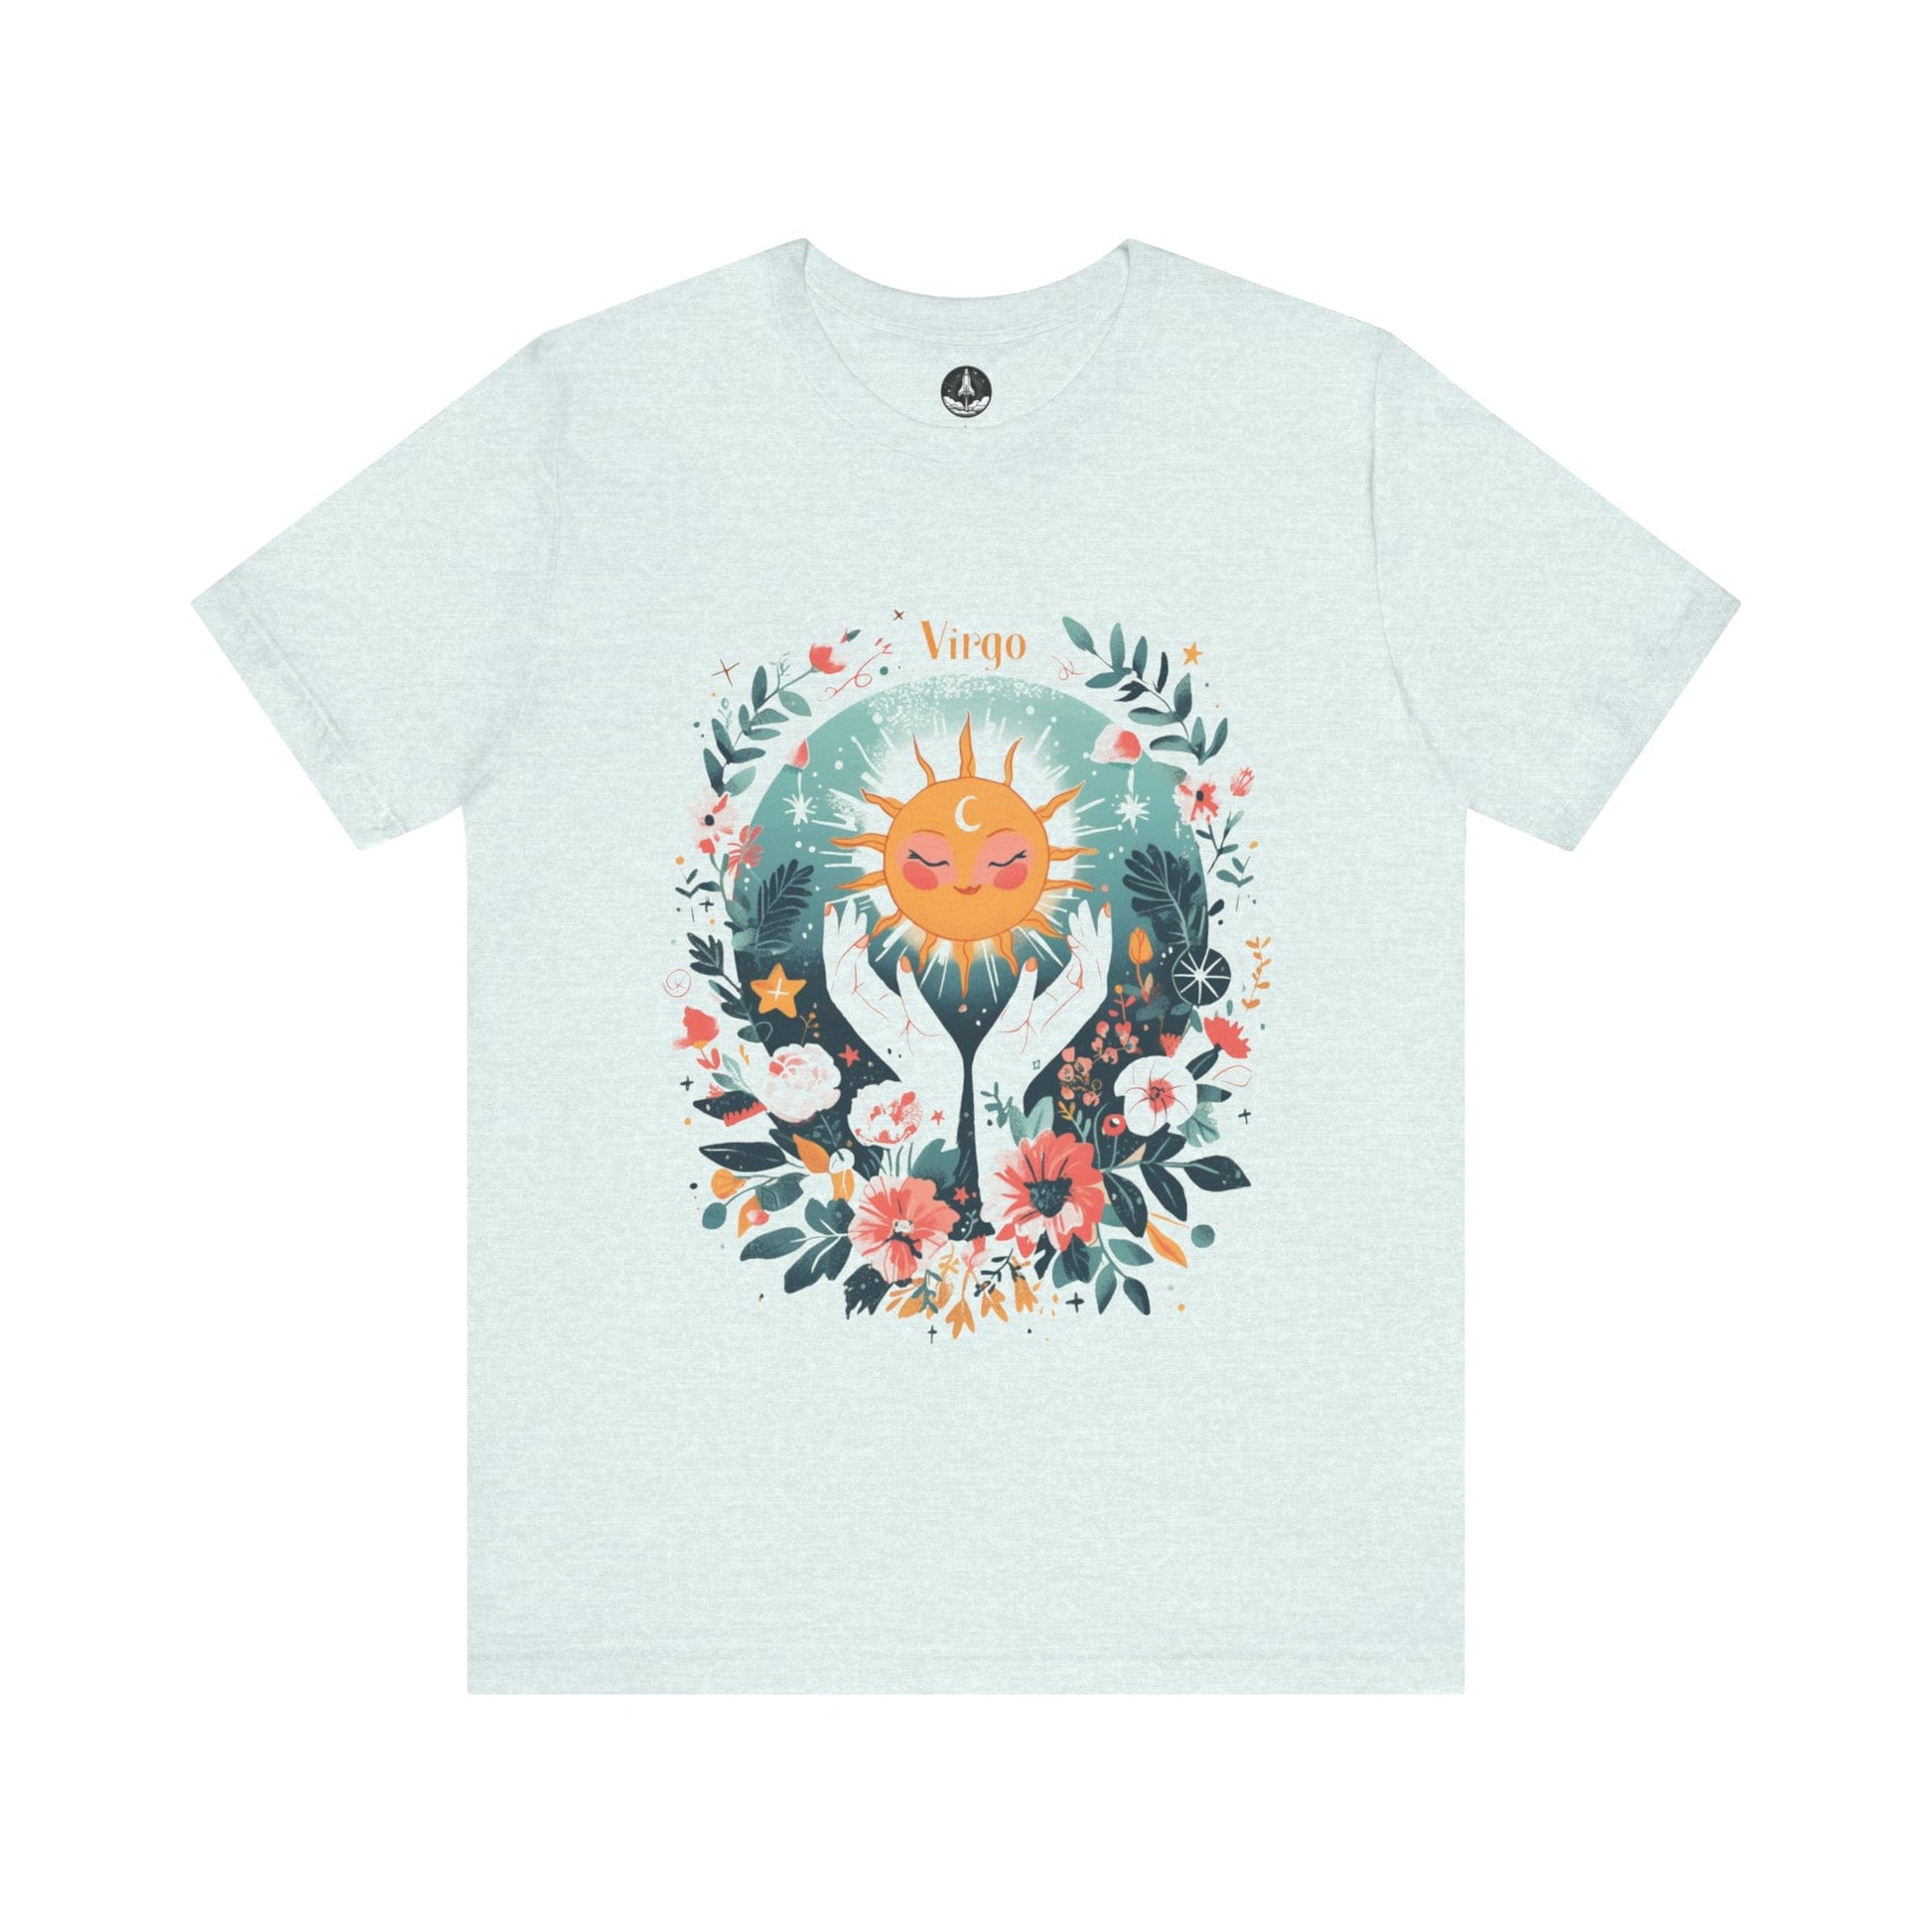 T-Shirt Heather Ice Blue / S Sunlit Maiden Virgo TShirt: Blossoming with Detail